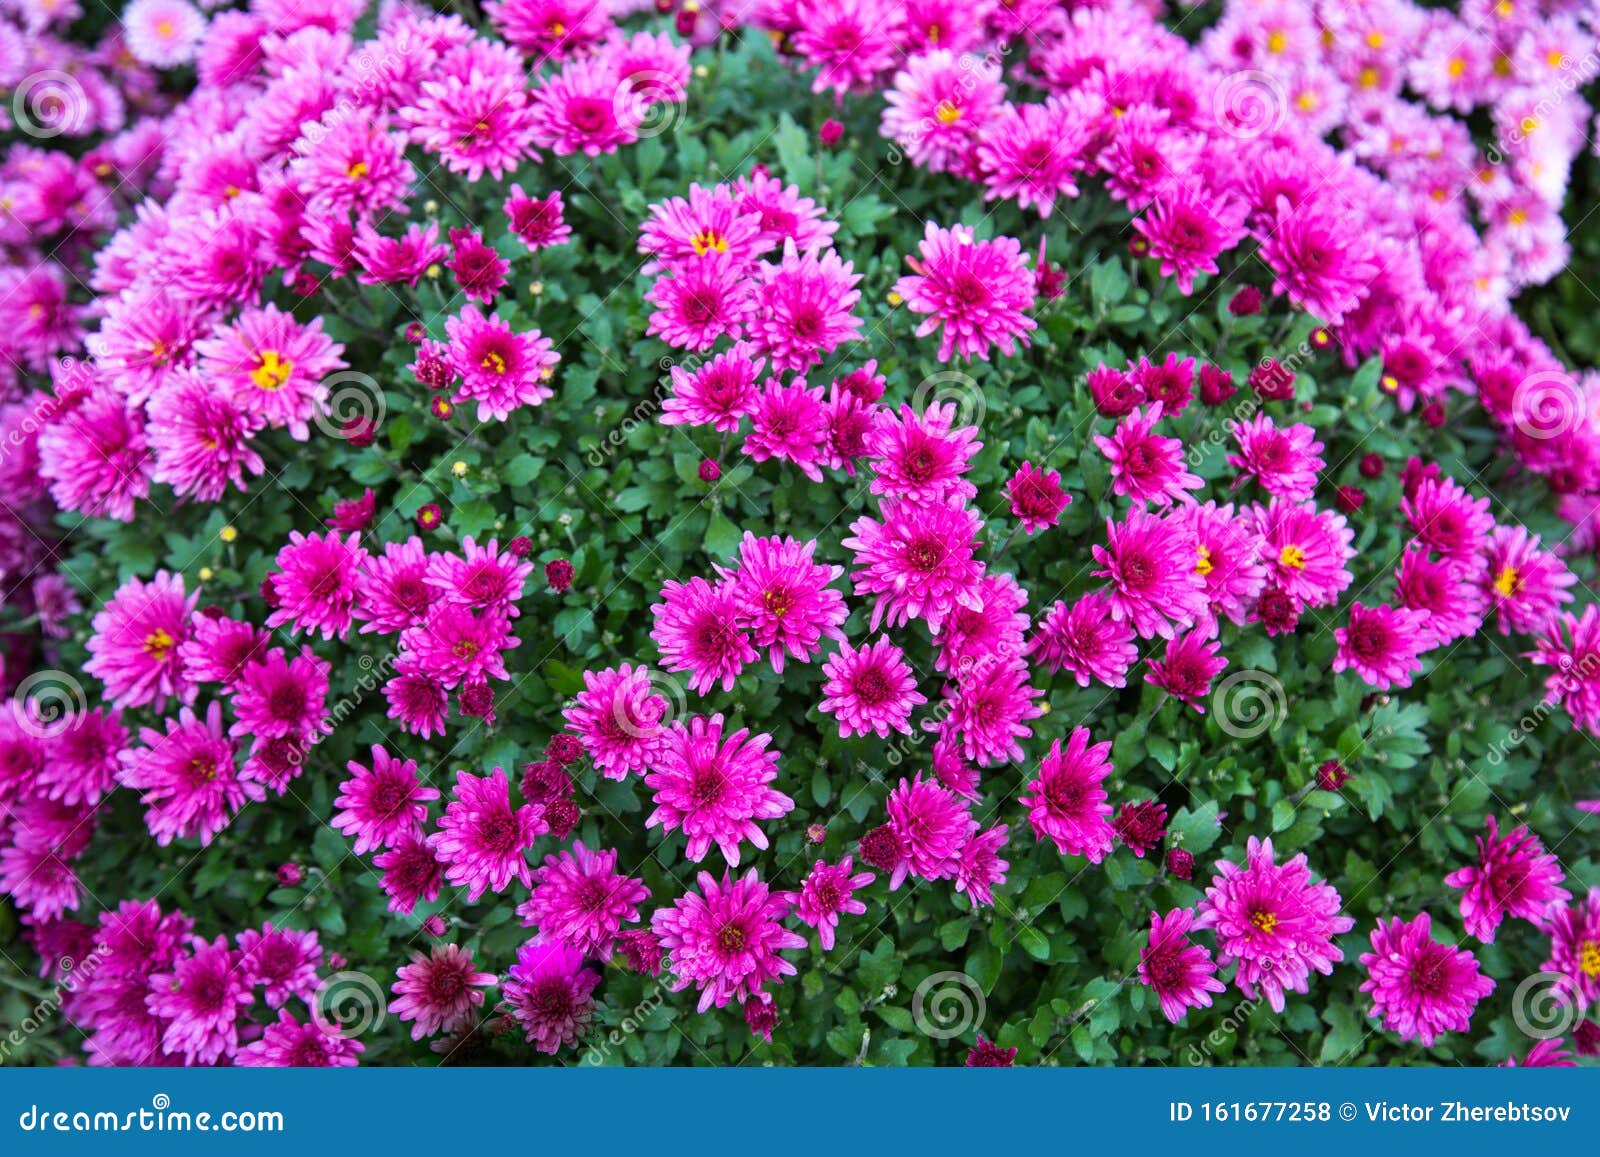 Bouquet Background Chrysanthemum Flowers Bright Pink with Green Leaves ...